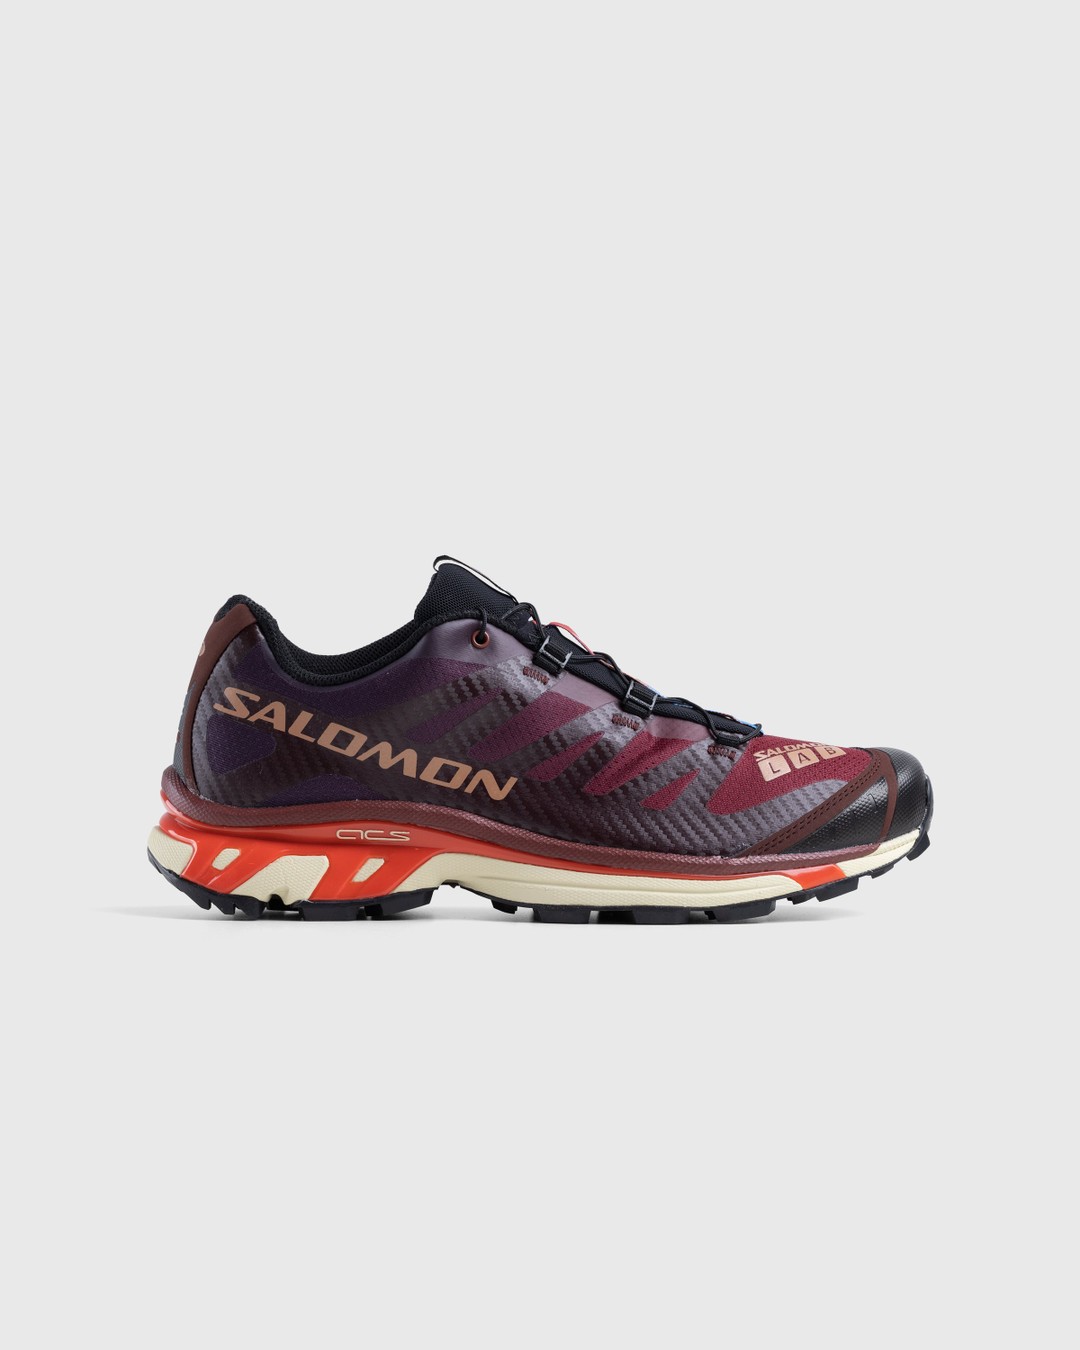 Salomon – XT-4 Bitter Chocolate/Mocha Mousse/Fiery Red - Sneakers - Red - Image 1